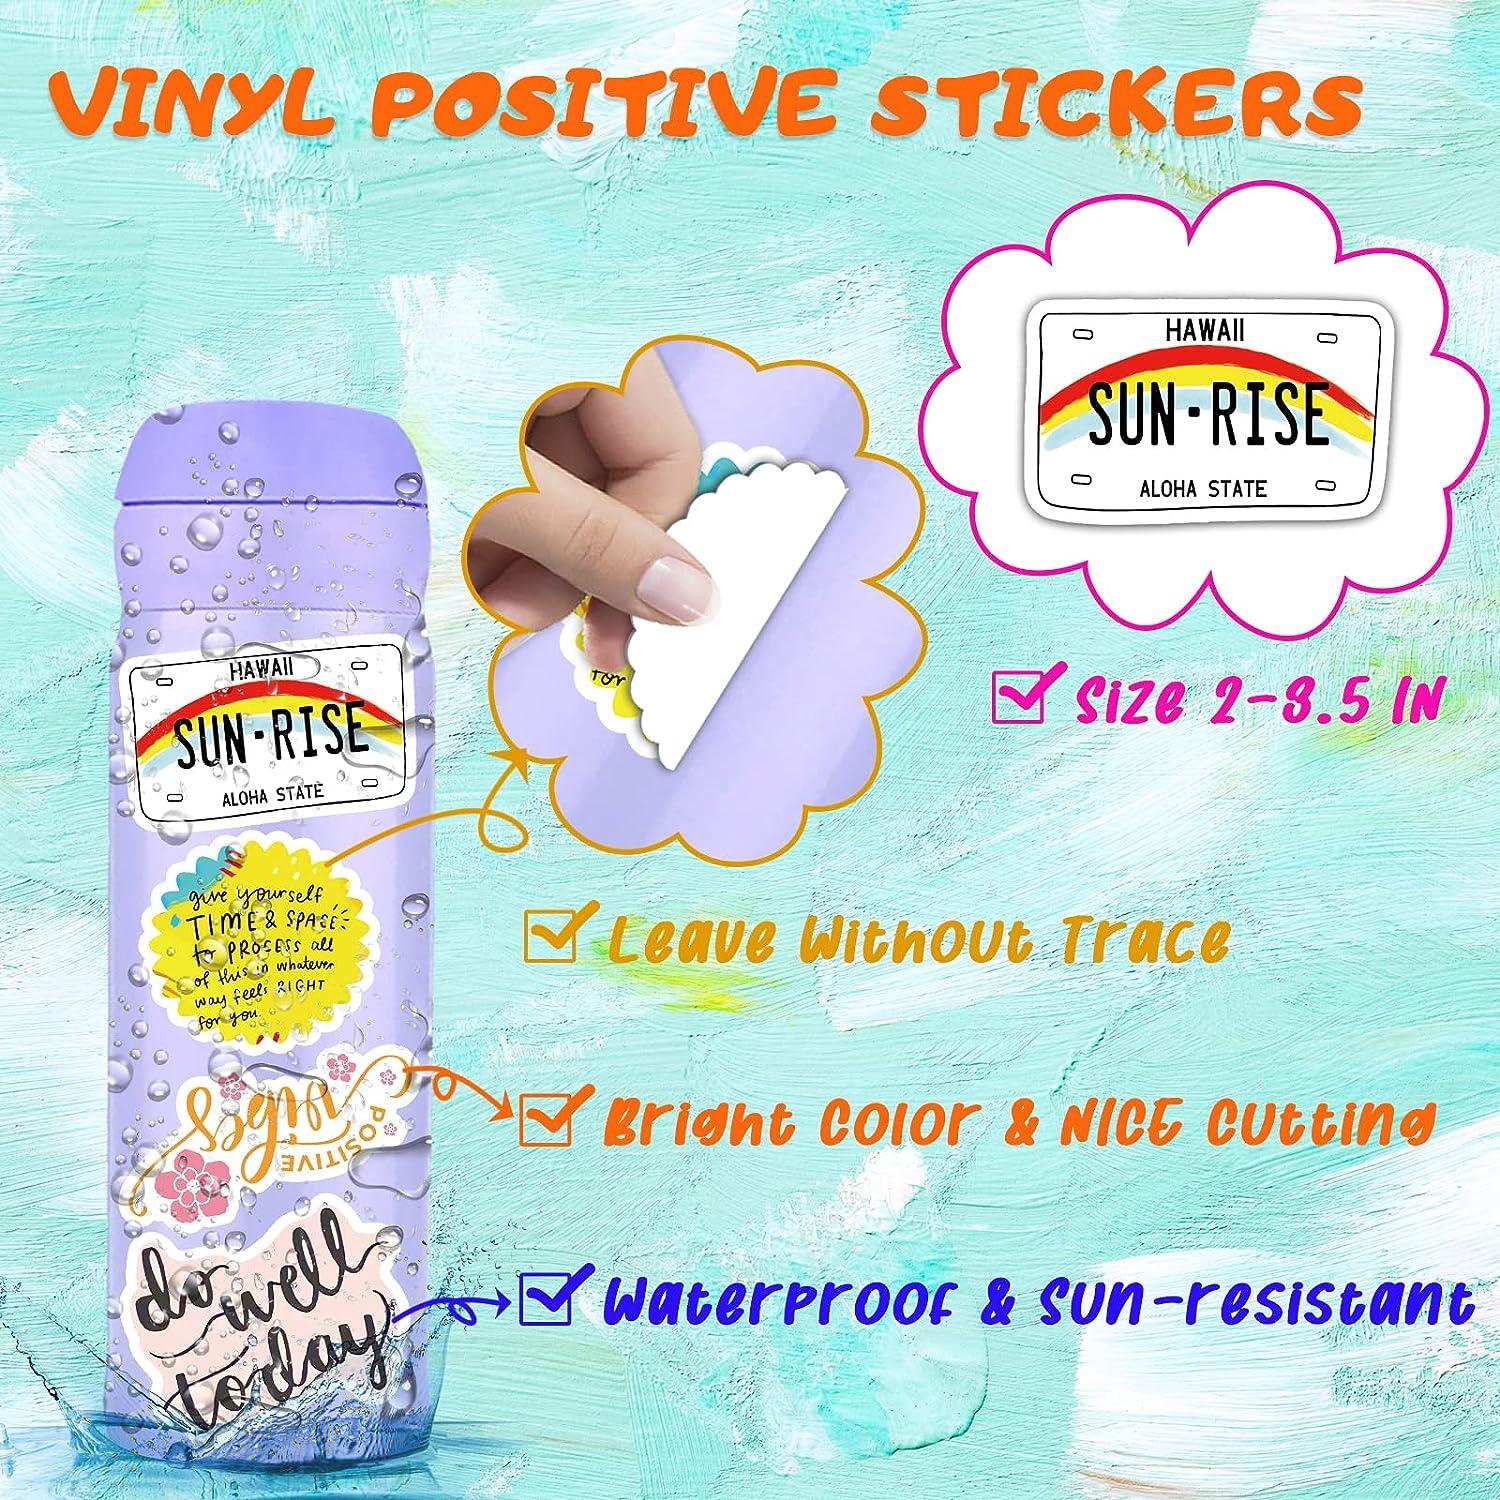 300 Pcs Trendy Cool Stickers For Kids, Vinyl Waterproof Vsco Aesthetic Cute Stickers  Decals, Gift For Kids Teens (colorful Stickers Pack-300pcs)